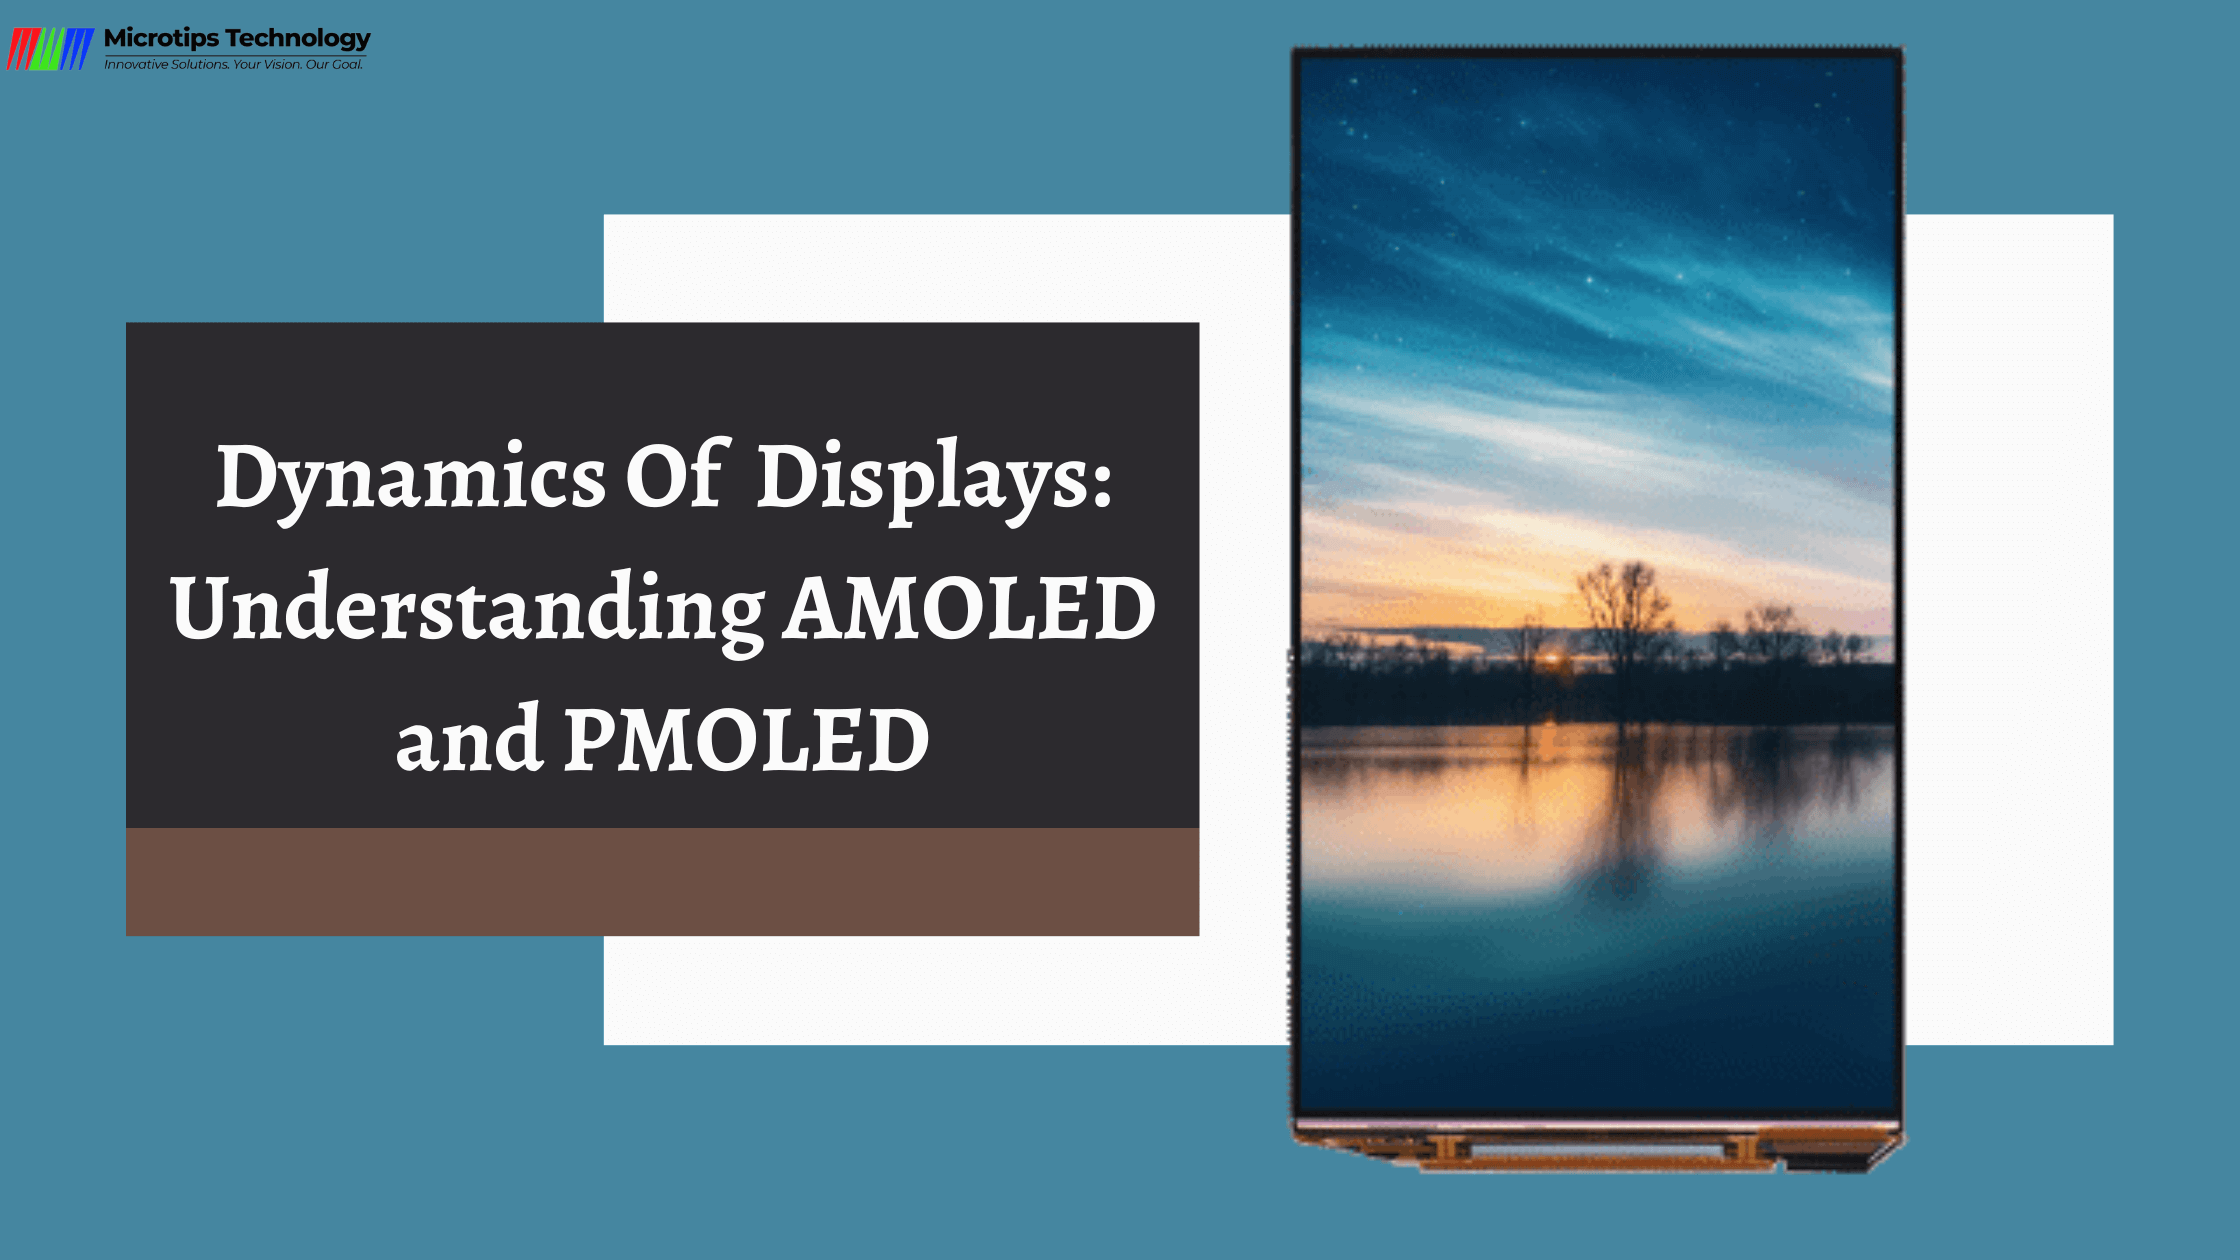 DYNAMICS OF DISPLAYS: UNDERSTANDING AMOLED AND PMOLED